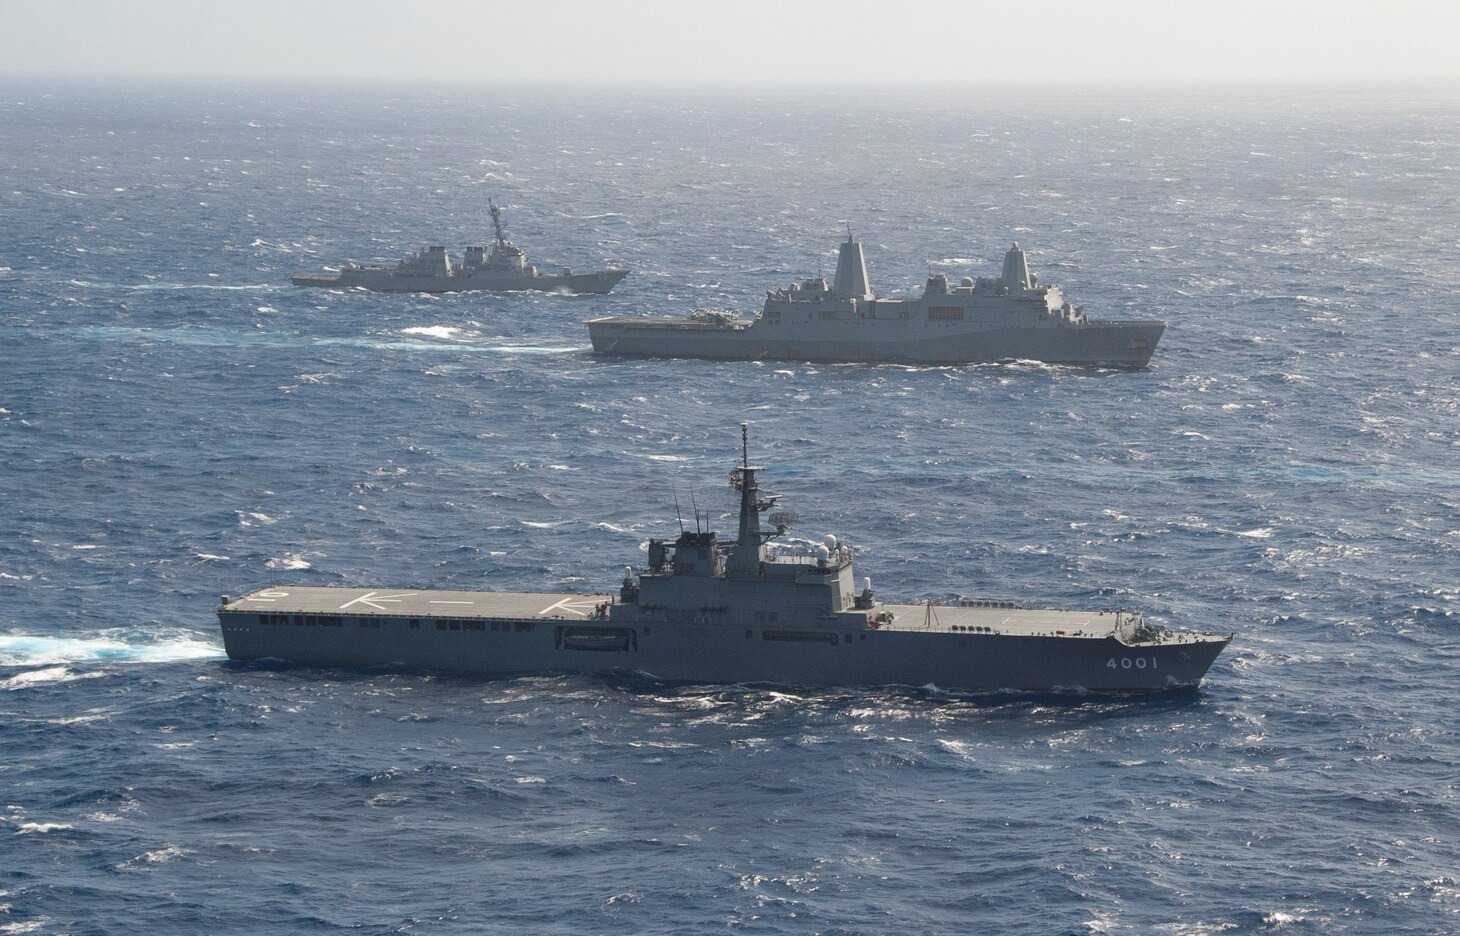 The Japan Maritime Self Defense Force (JMSDF) amphibious transport dock ship JS Osumi (LST 4001),  transport dock ship USS Green Bay (LPD 20), and Arleigh Burke class guided missile destroyer USS Shoup (DDG 86) sail alongside during a Passing Exercise (PASSEX) in the Philippine Sea Aug. 26, 2018. PASSEX enabled the Wasp ARG and the JMSDF a chance to practice communications and maneuvering procedures. The Wasp ARG is currently operating in the region to enhance interoperability with partners and serve as a ready-response force for any type of contingency.